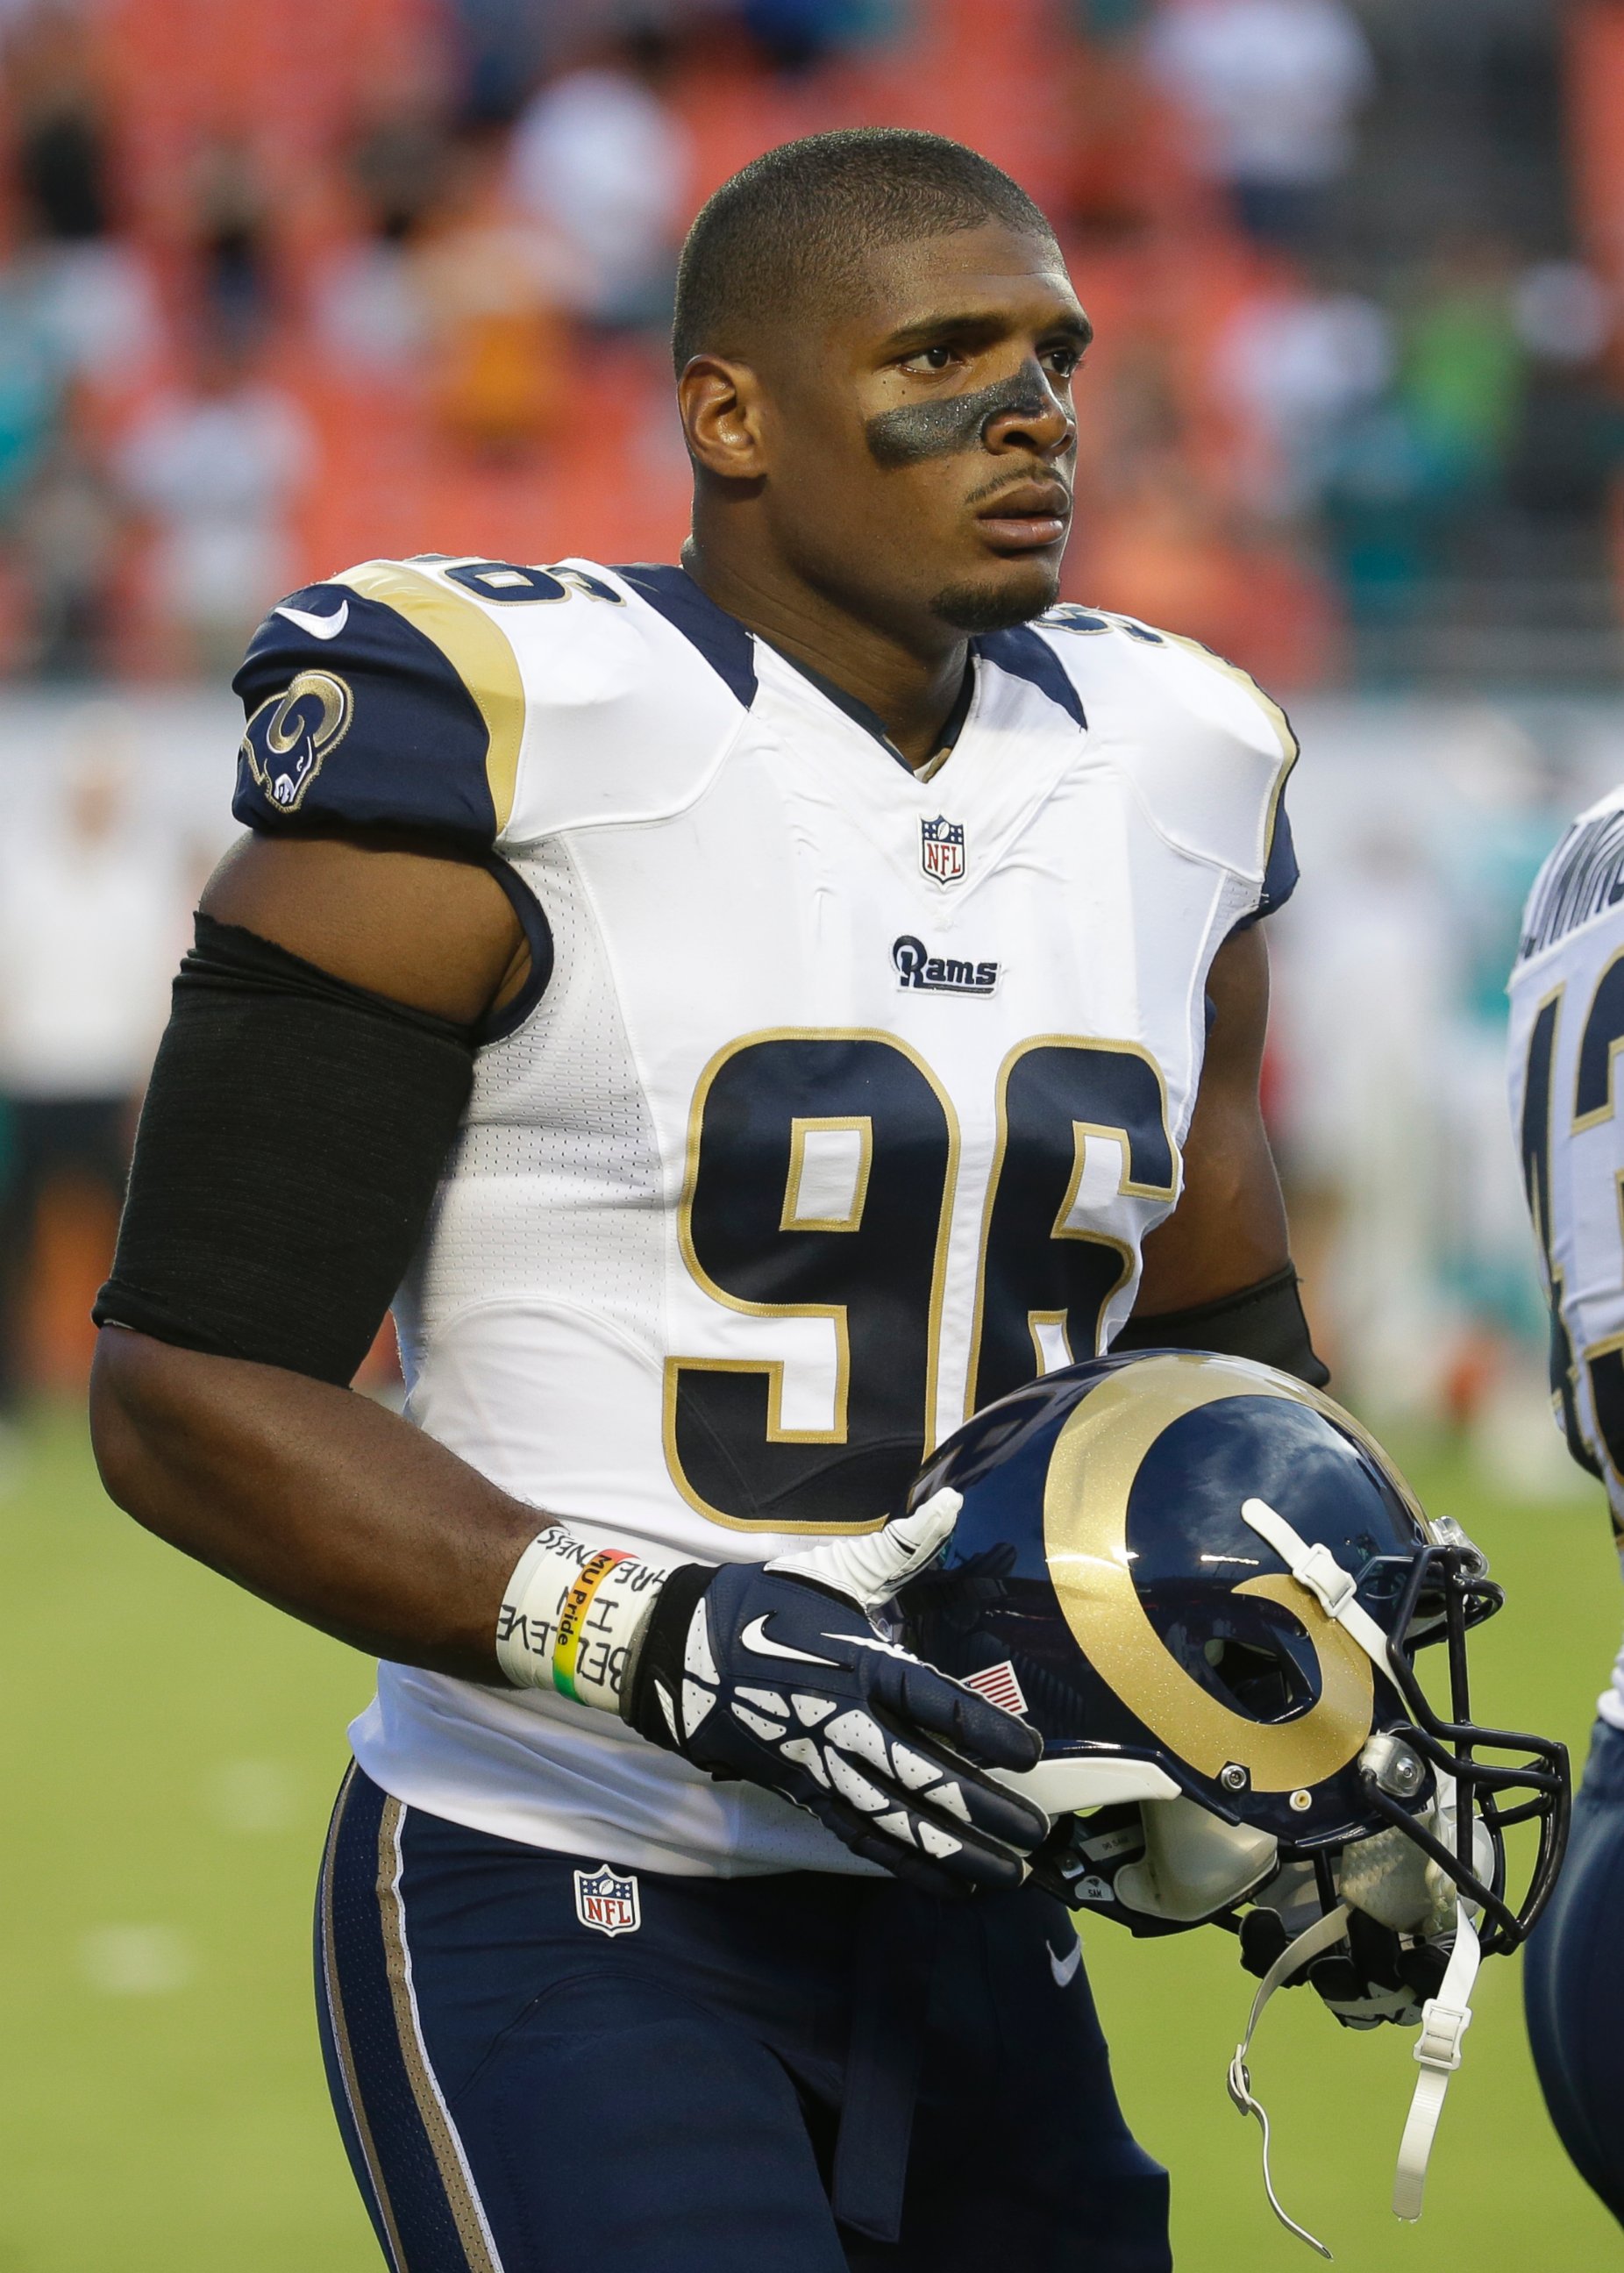 PHOTO: St. Louis Rams defensive end Michael Sam (96) on the sidelines during the first half of an NFL preseason football game against the Miami Dolphins, Aug. 28, 2014 in Miami Gardens, Fla.